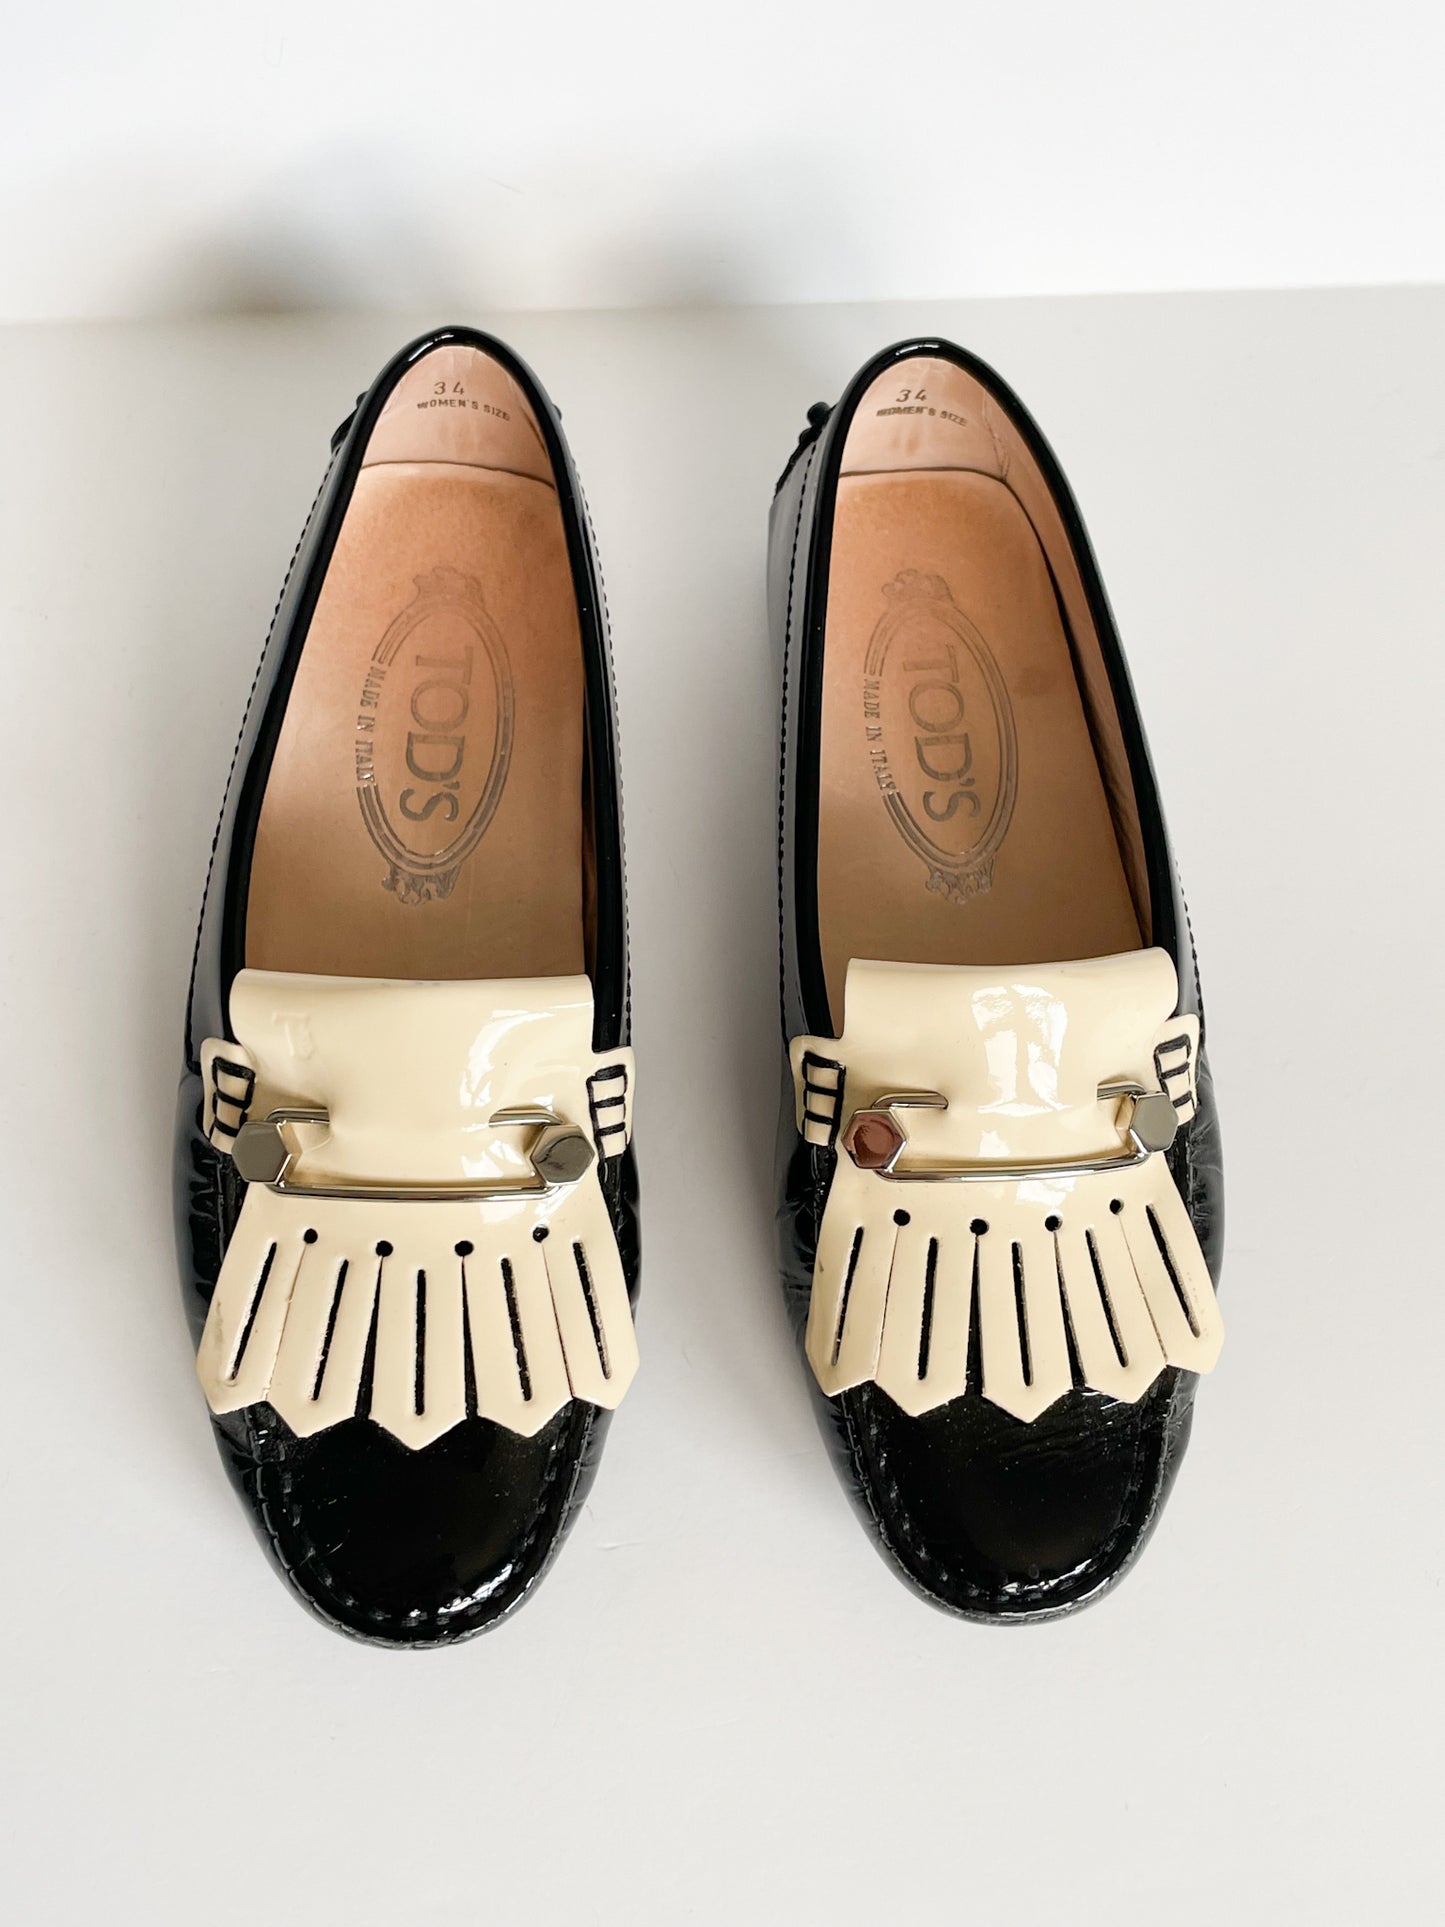 TOD'S Black Cream Fringed Patent Leather Loafers - Size 34